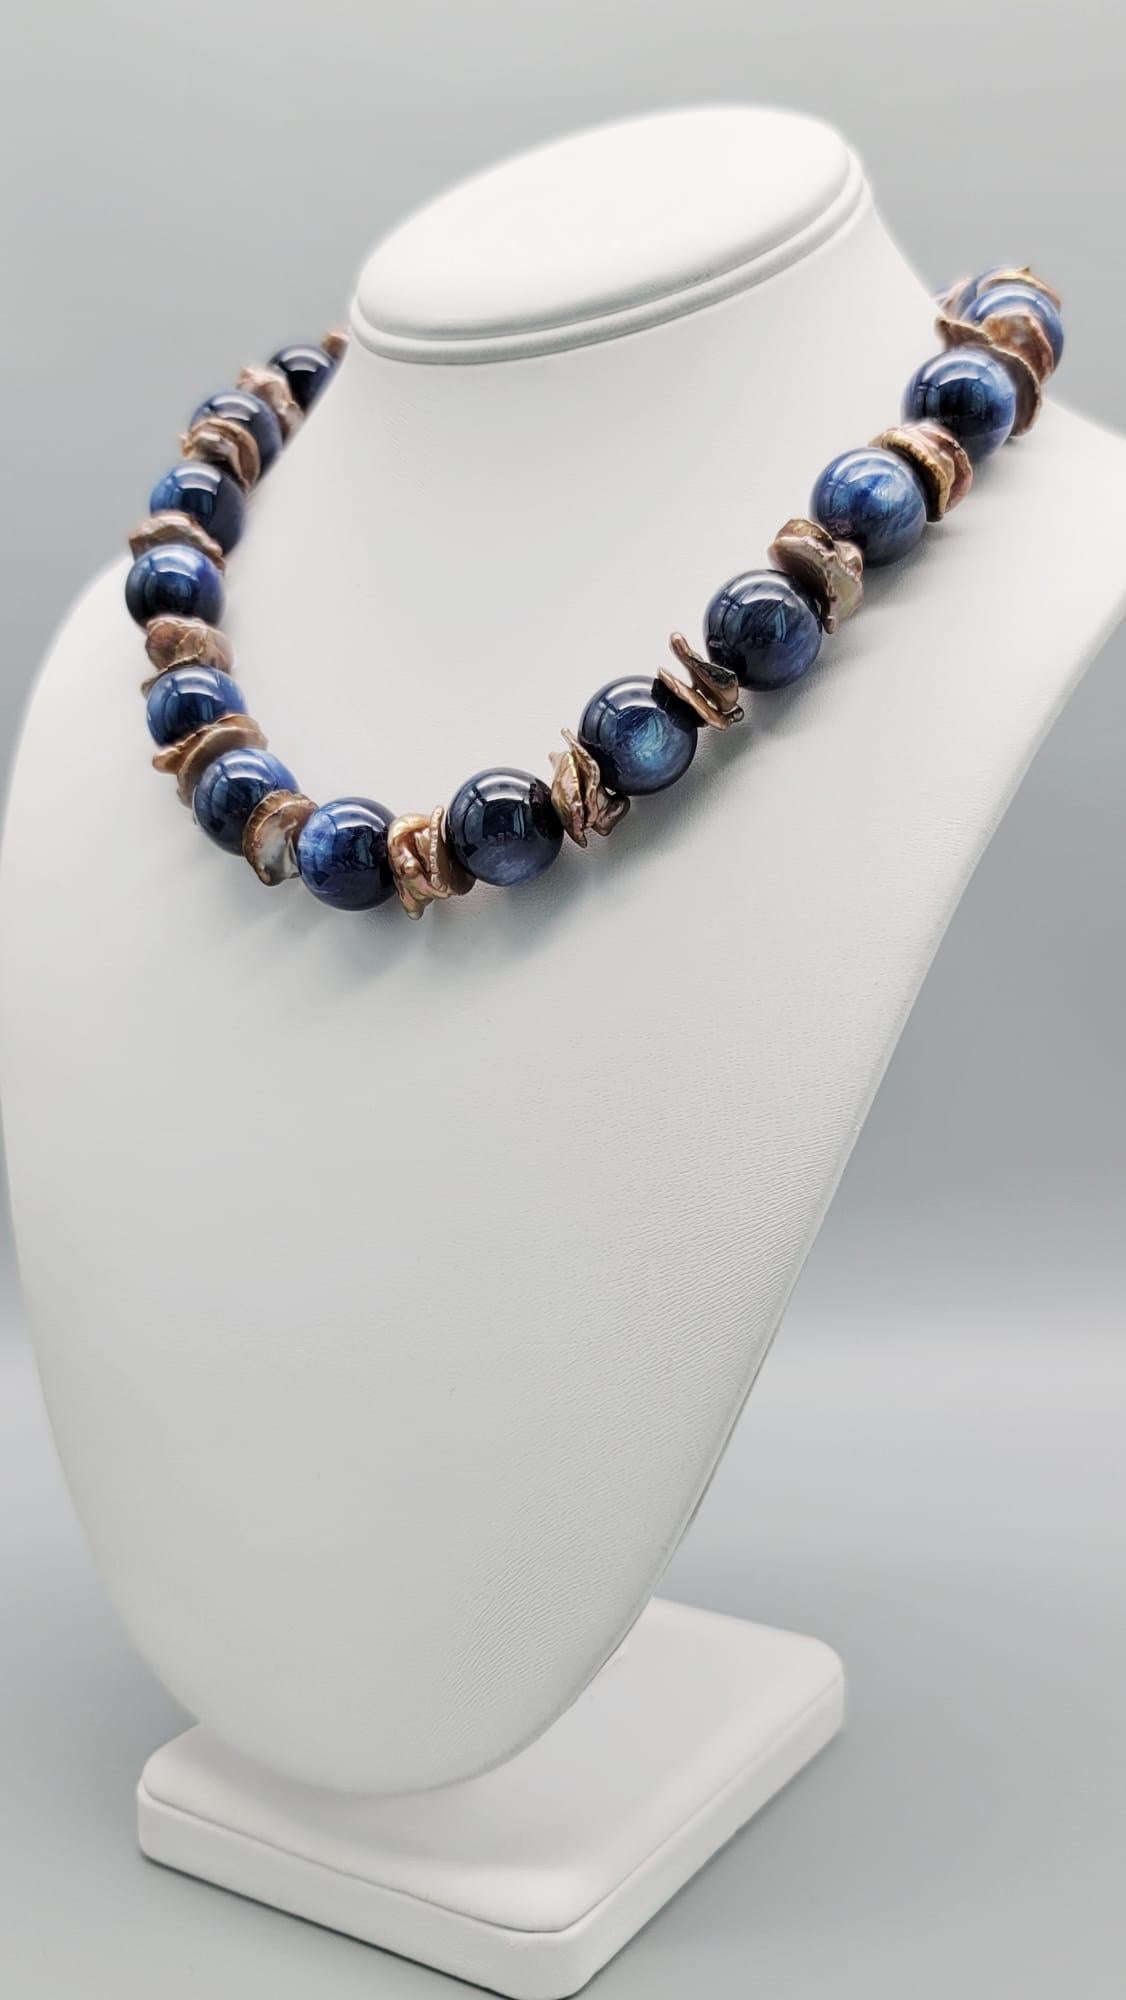 One-of-a-Kind

Rich blue Kyanite is matched with center-drilled bronze Keshi Pearls To surround a specimen piece of Jasper clasp. The combination of rich blue and creamy beige is an unusually felicitous one.
Silk hand-knotted
Approx: 18 inches